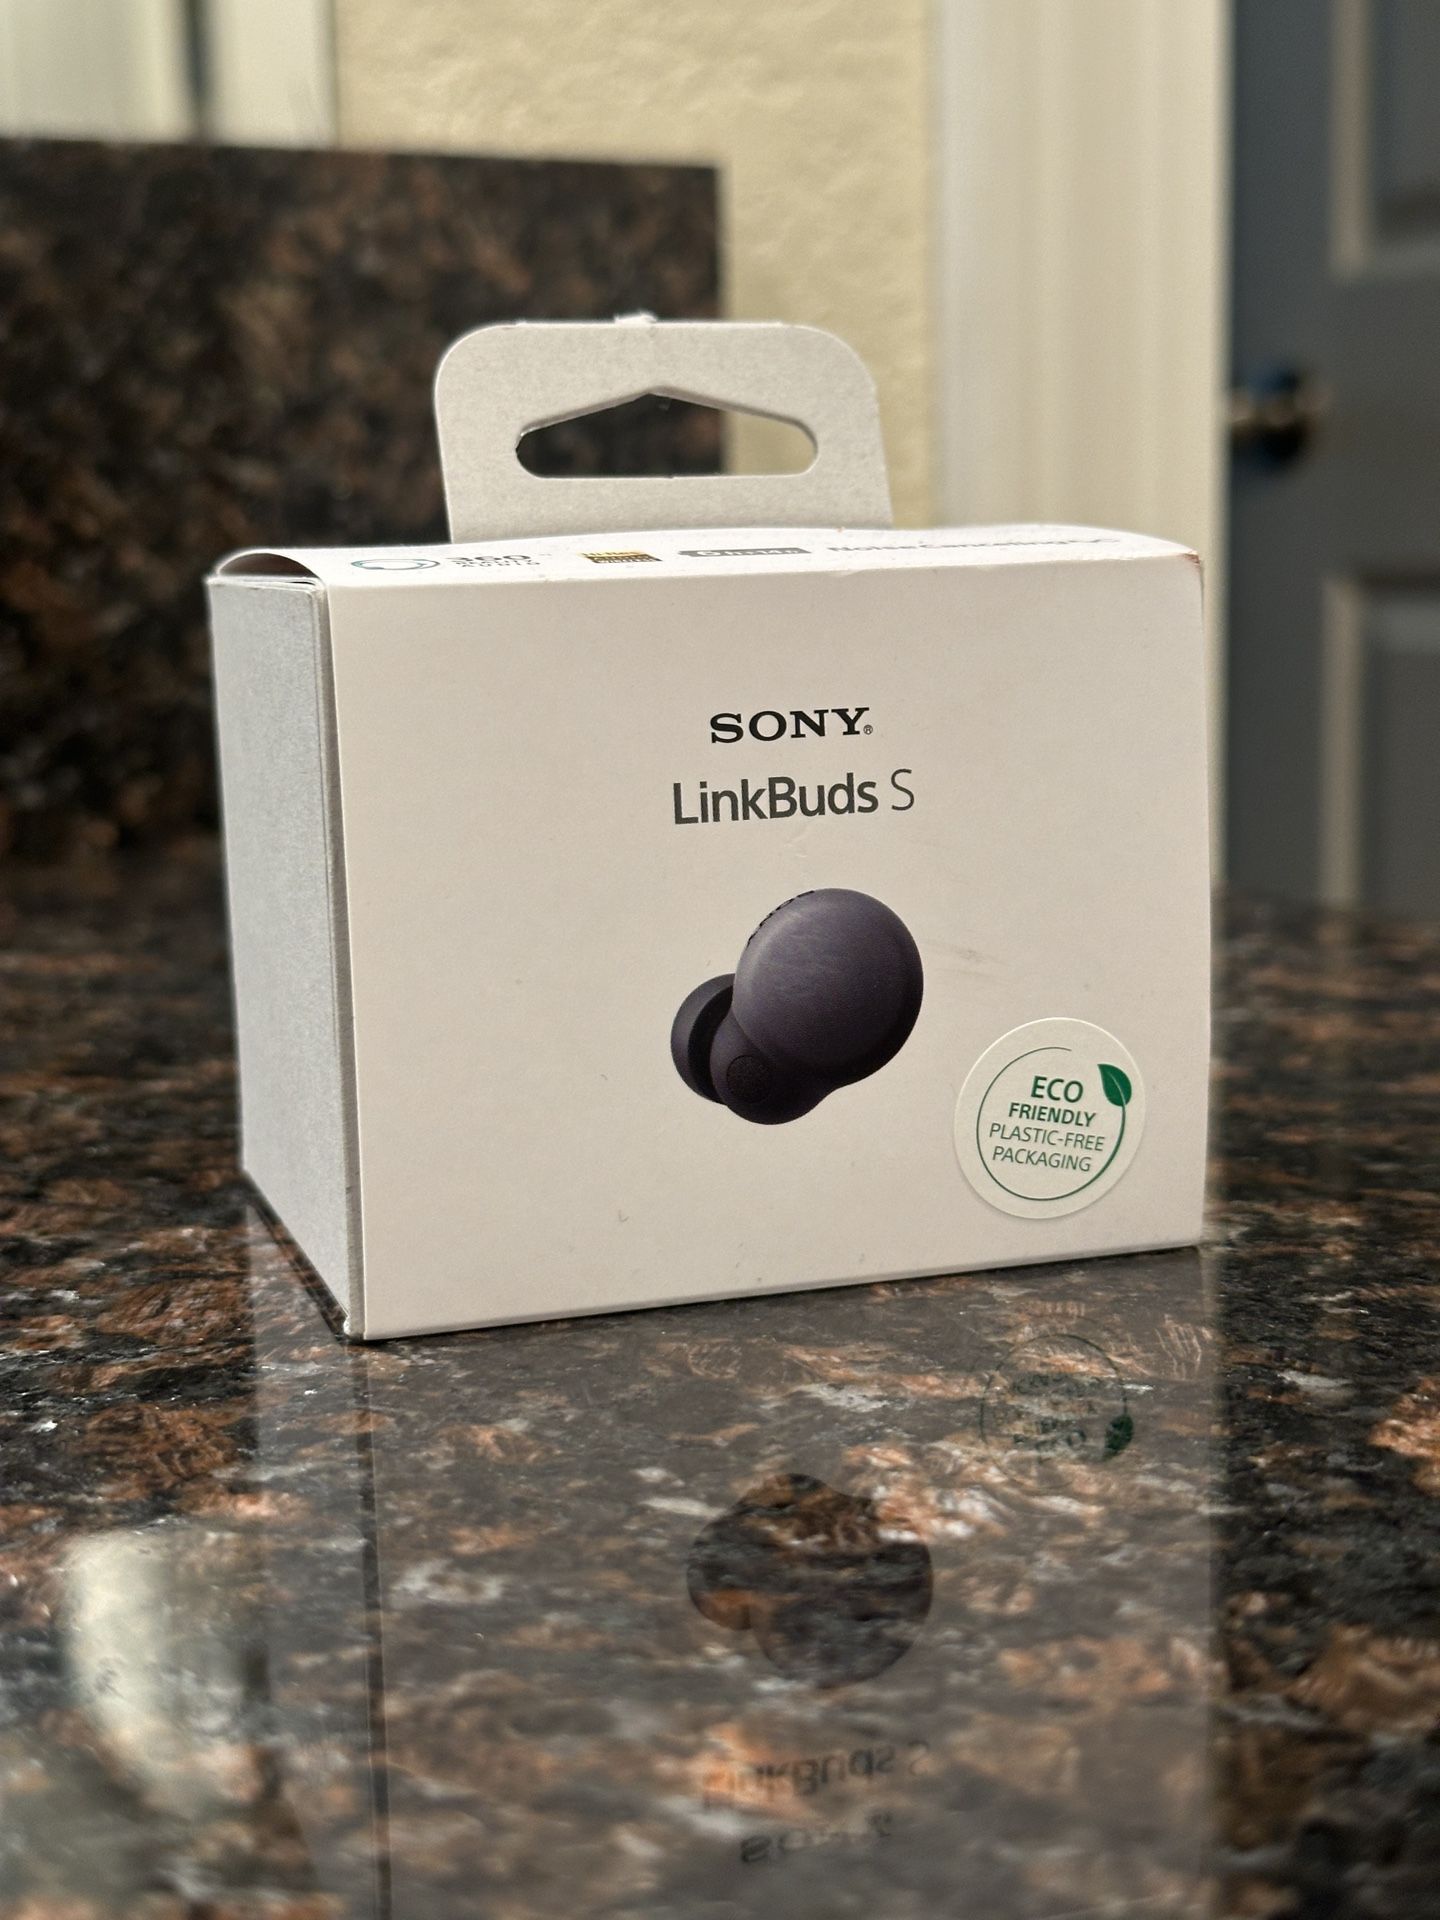 New Unboxed Sony LinkBuds S